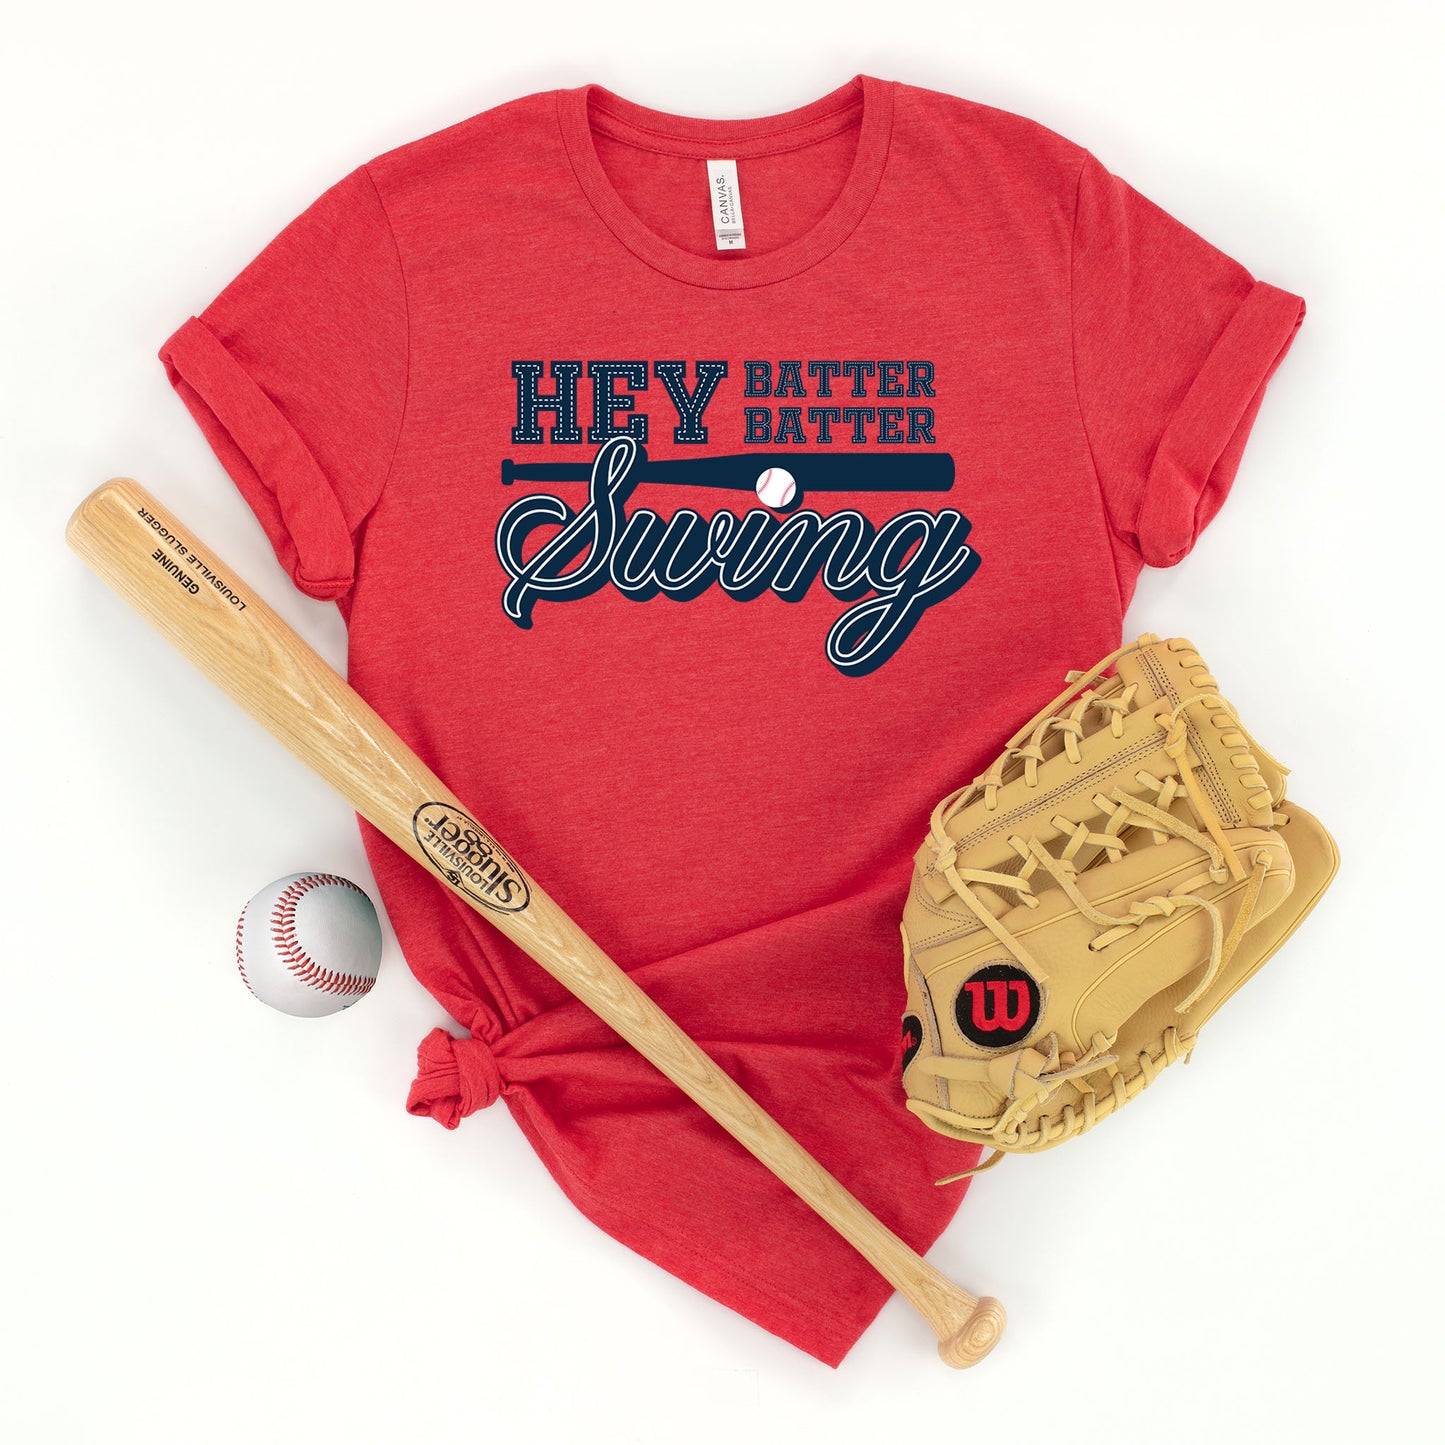 "Hey Batter Batter" Heather Red T-Shirt - (Adult Only)